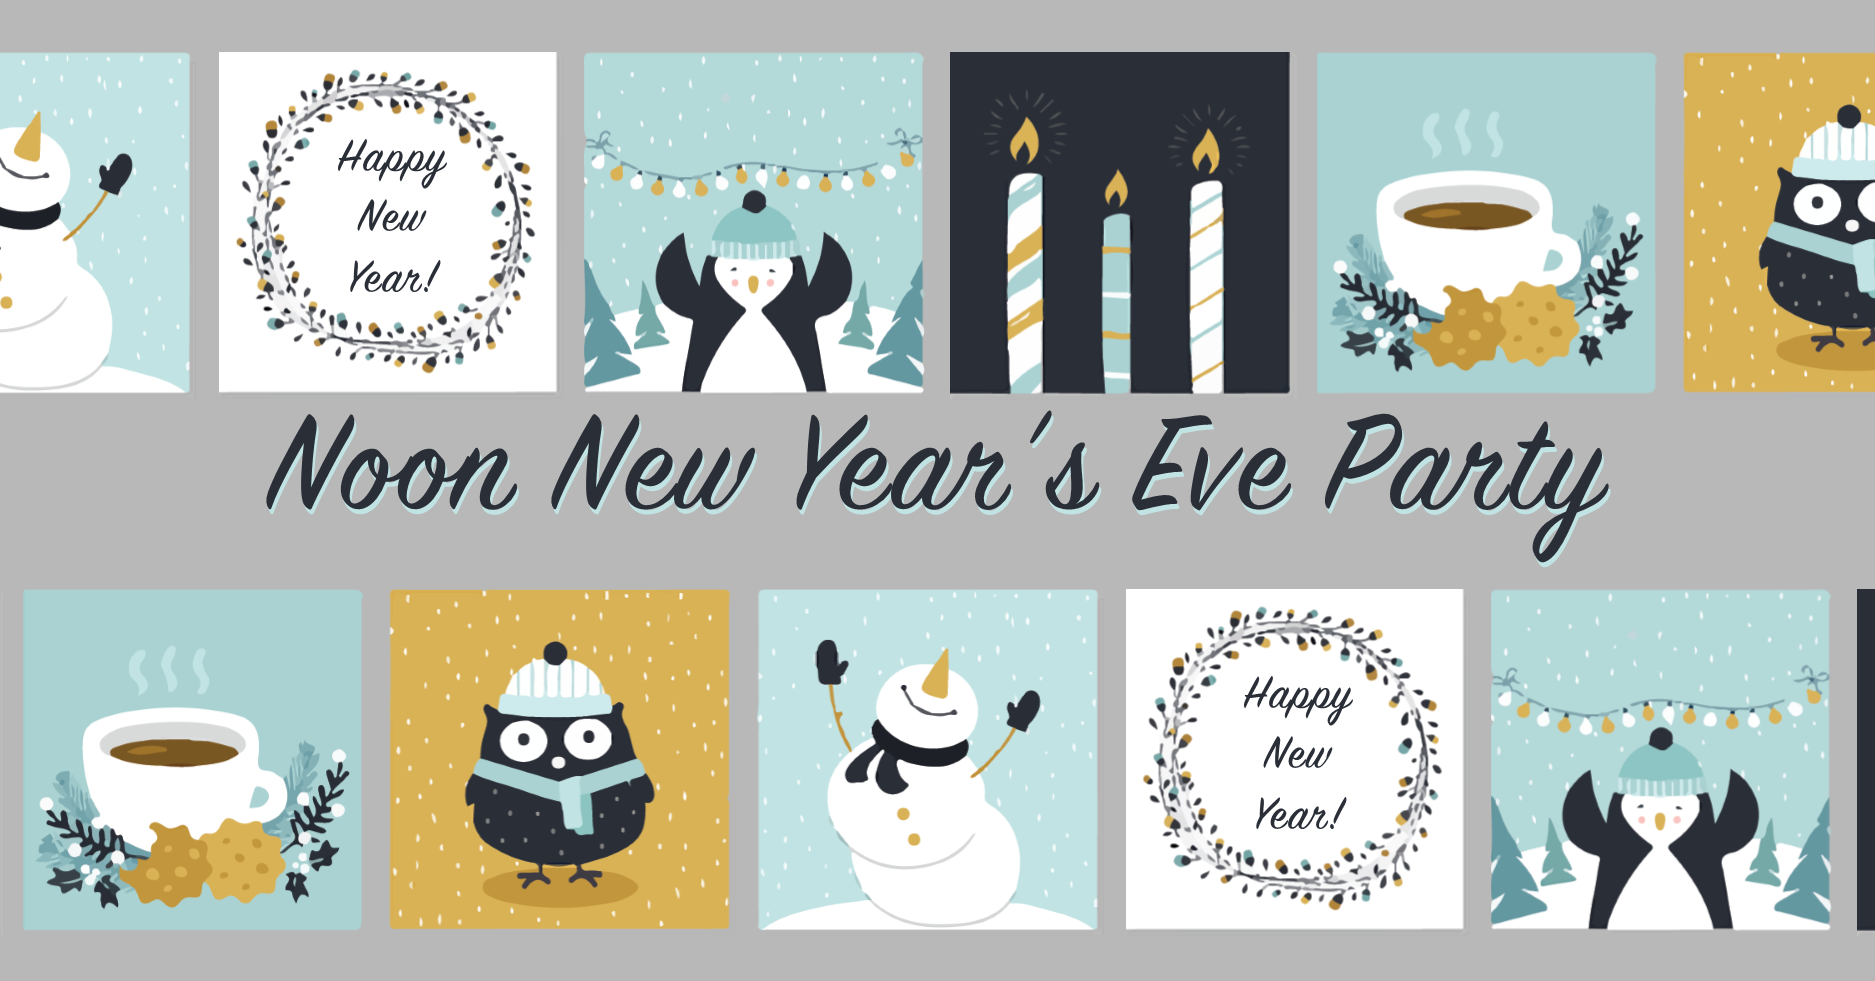 Illustrations of penguins, owls, and snowmen, with text that says "Noon new year's eve party"